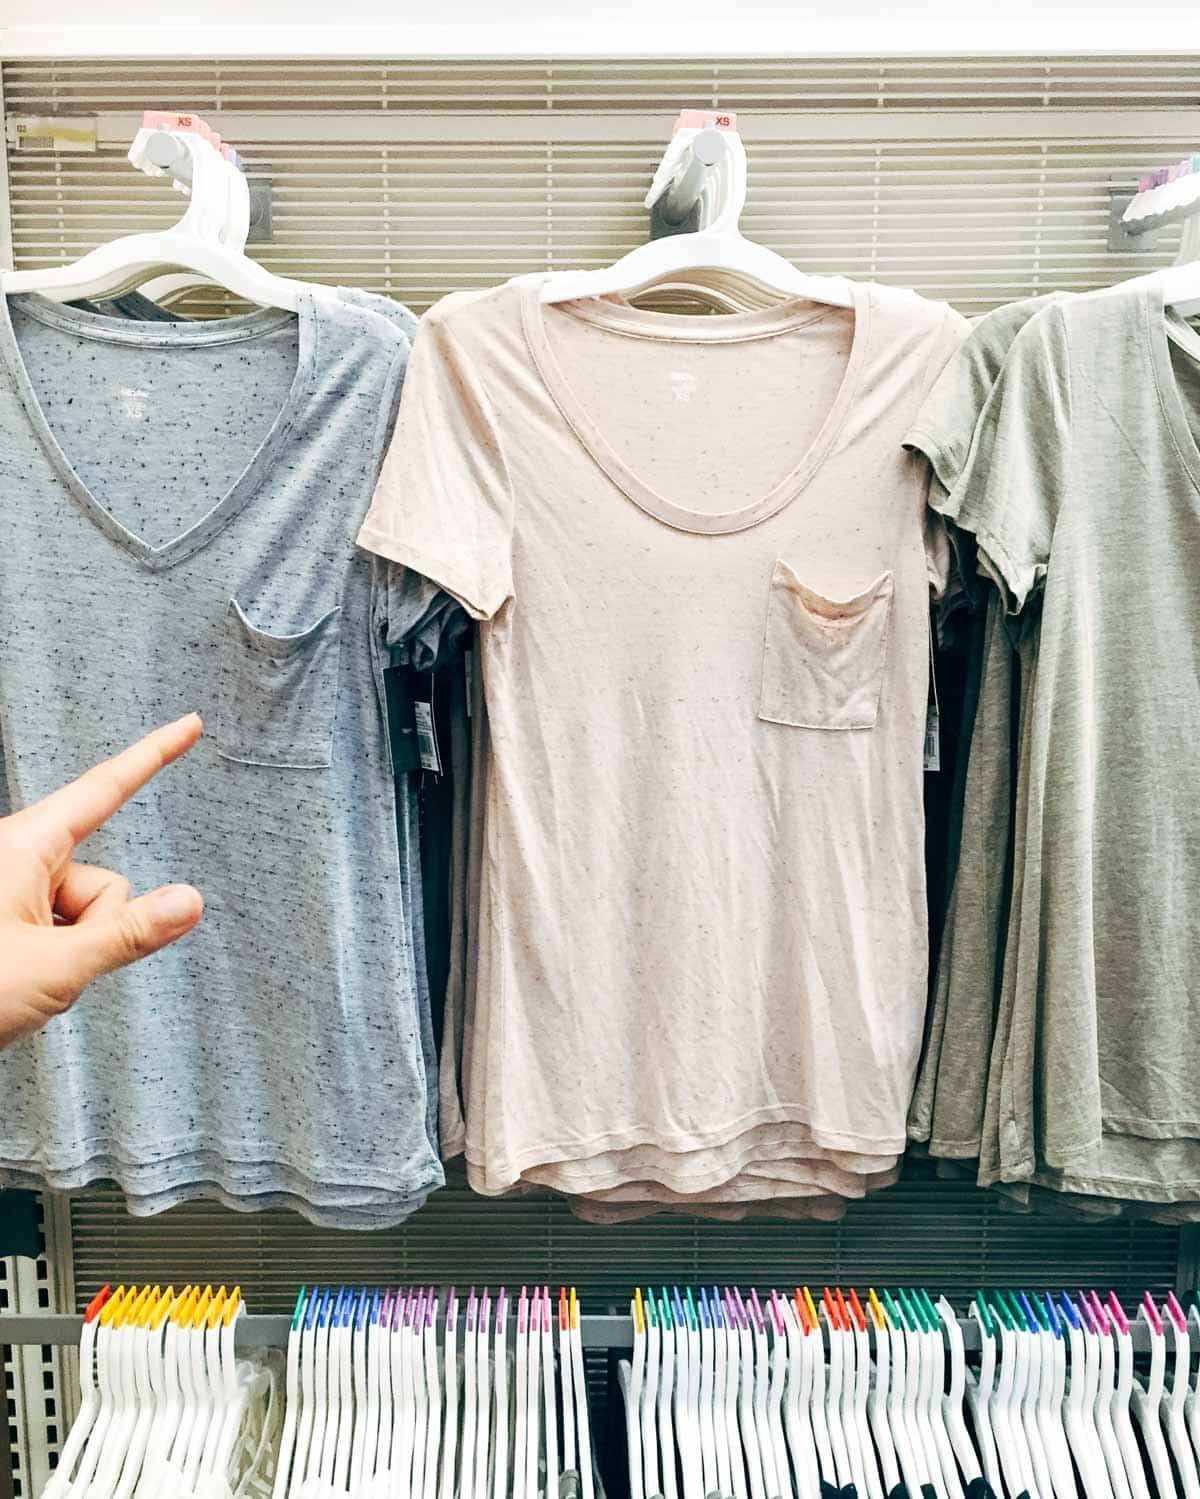 Hand pointing to a cream colored shirt on a rack.